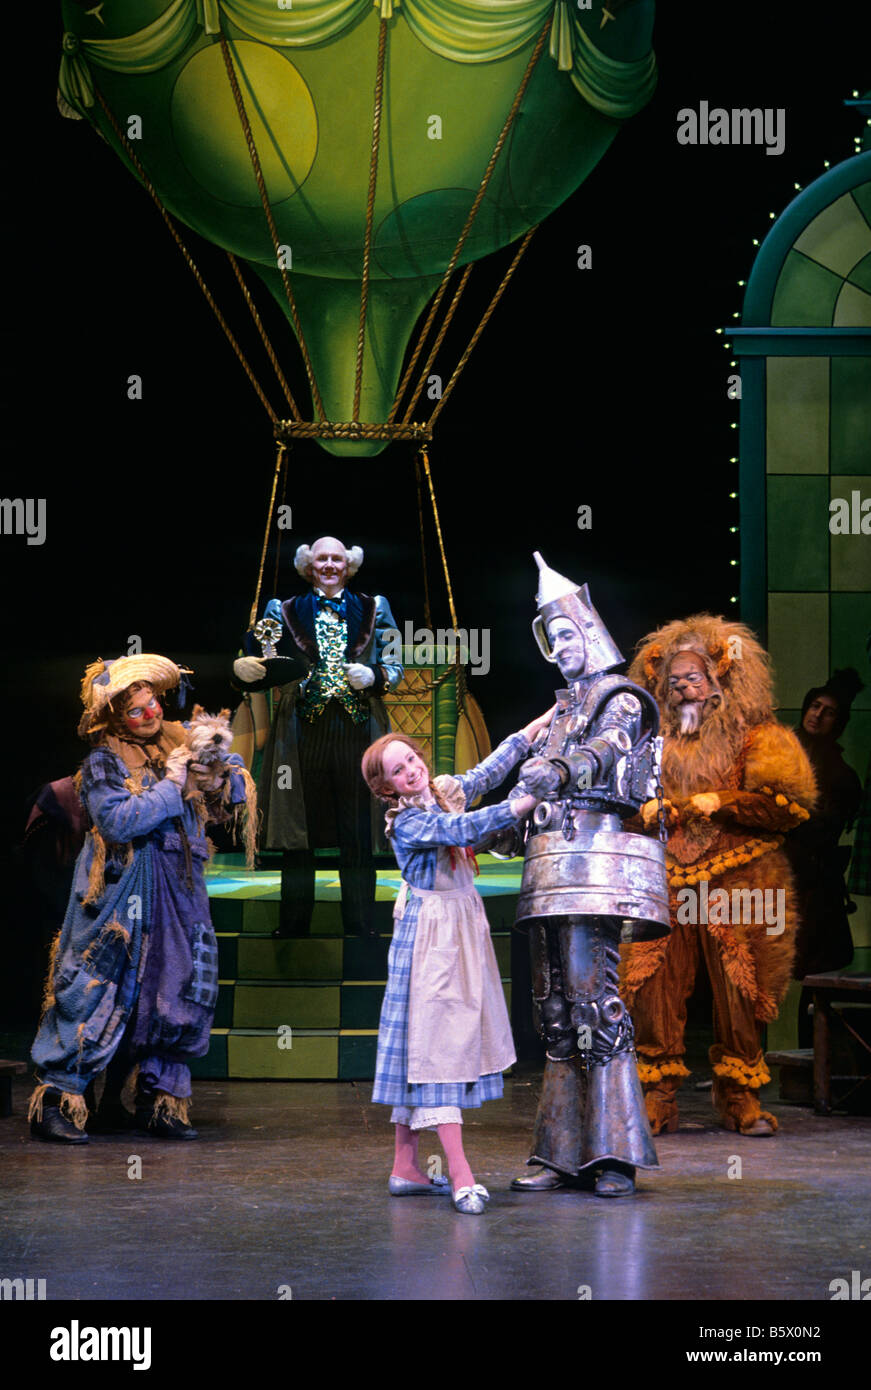 THE WONDERFUL WIZARD OF OZ STAGE PRODUCTION AT THE MINNEAPOLIS, MINNESOTA CHILDREN'S THEATER. Stock Photo